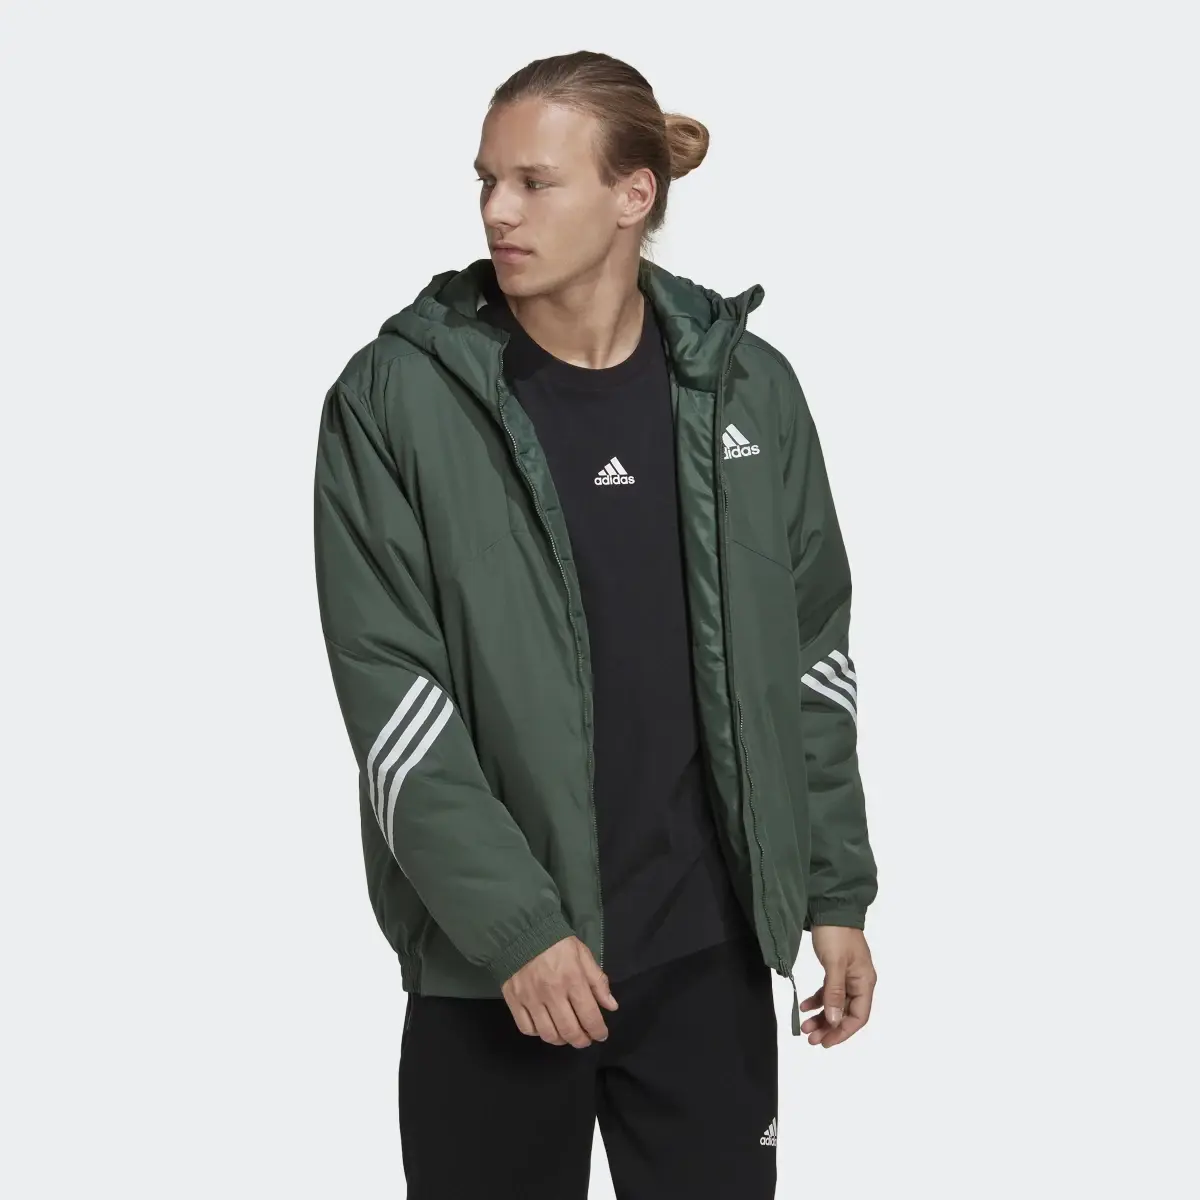 Adidas Back to Sport Hooded Jacket. 2